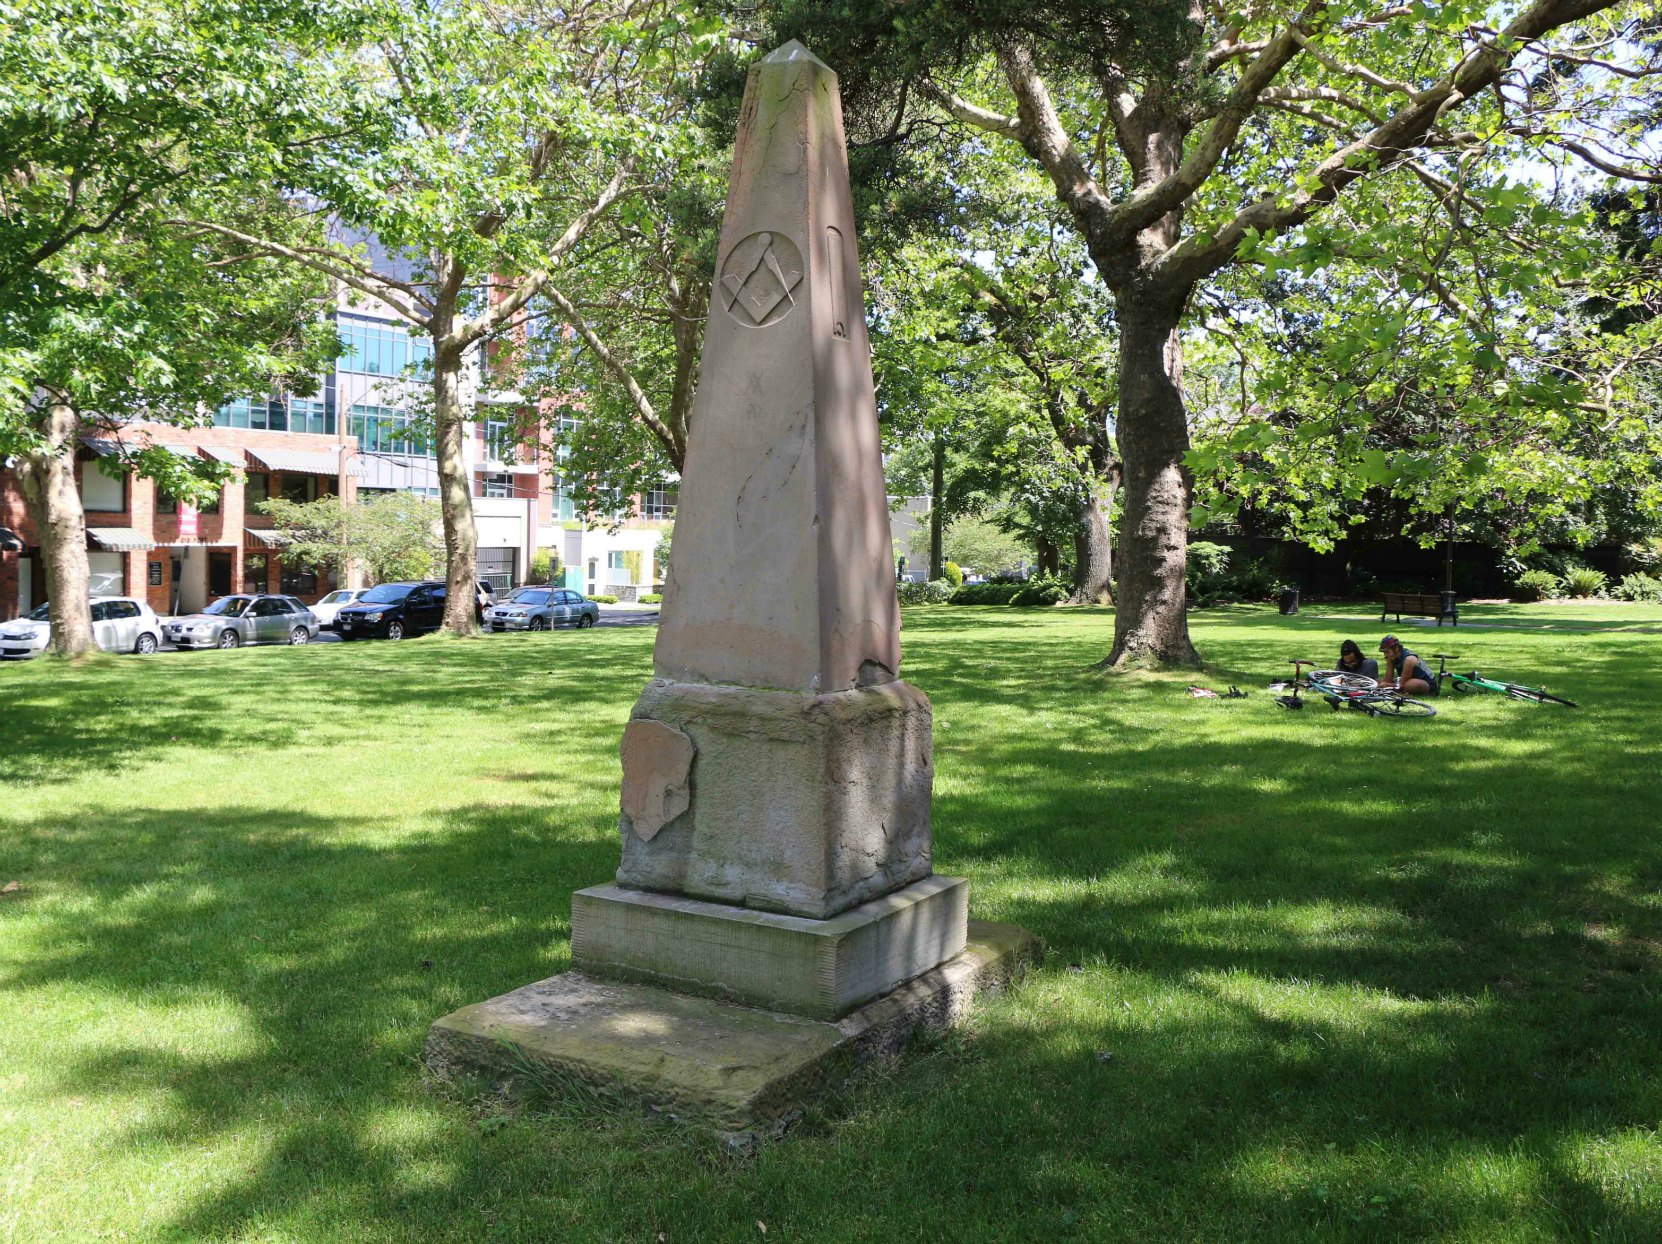 The grave of Andrew Phillips in Pioneer Square (photo by Victoria Online Sightseeing Tours)